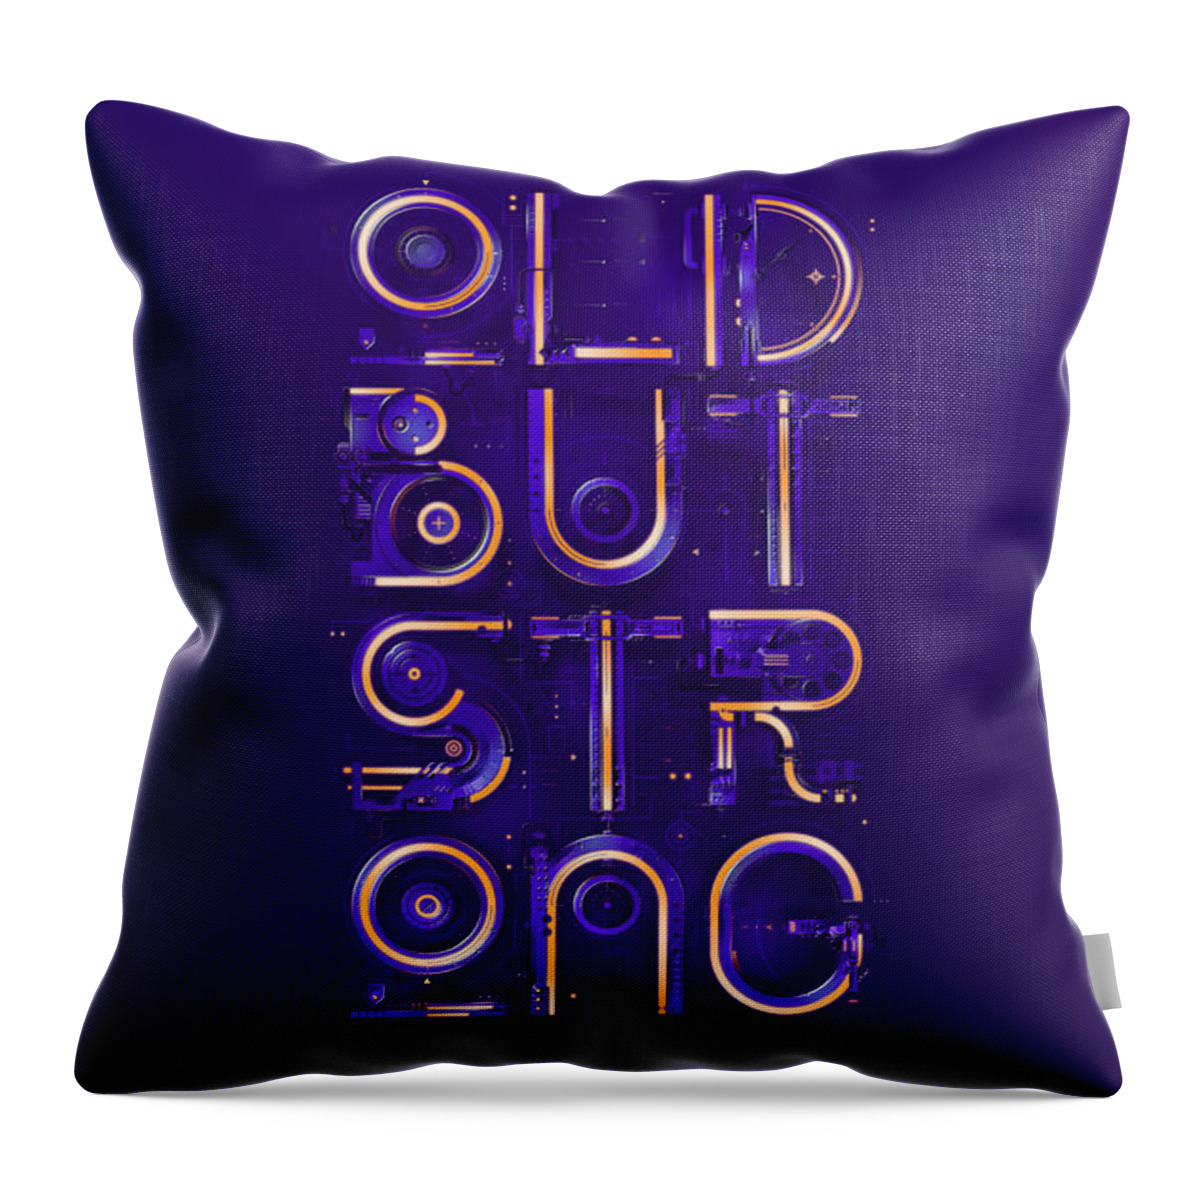 Statement Throw Pillow featuring the digital art Statement #7 by Maye Loeser